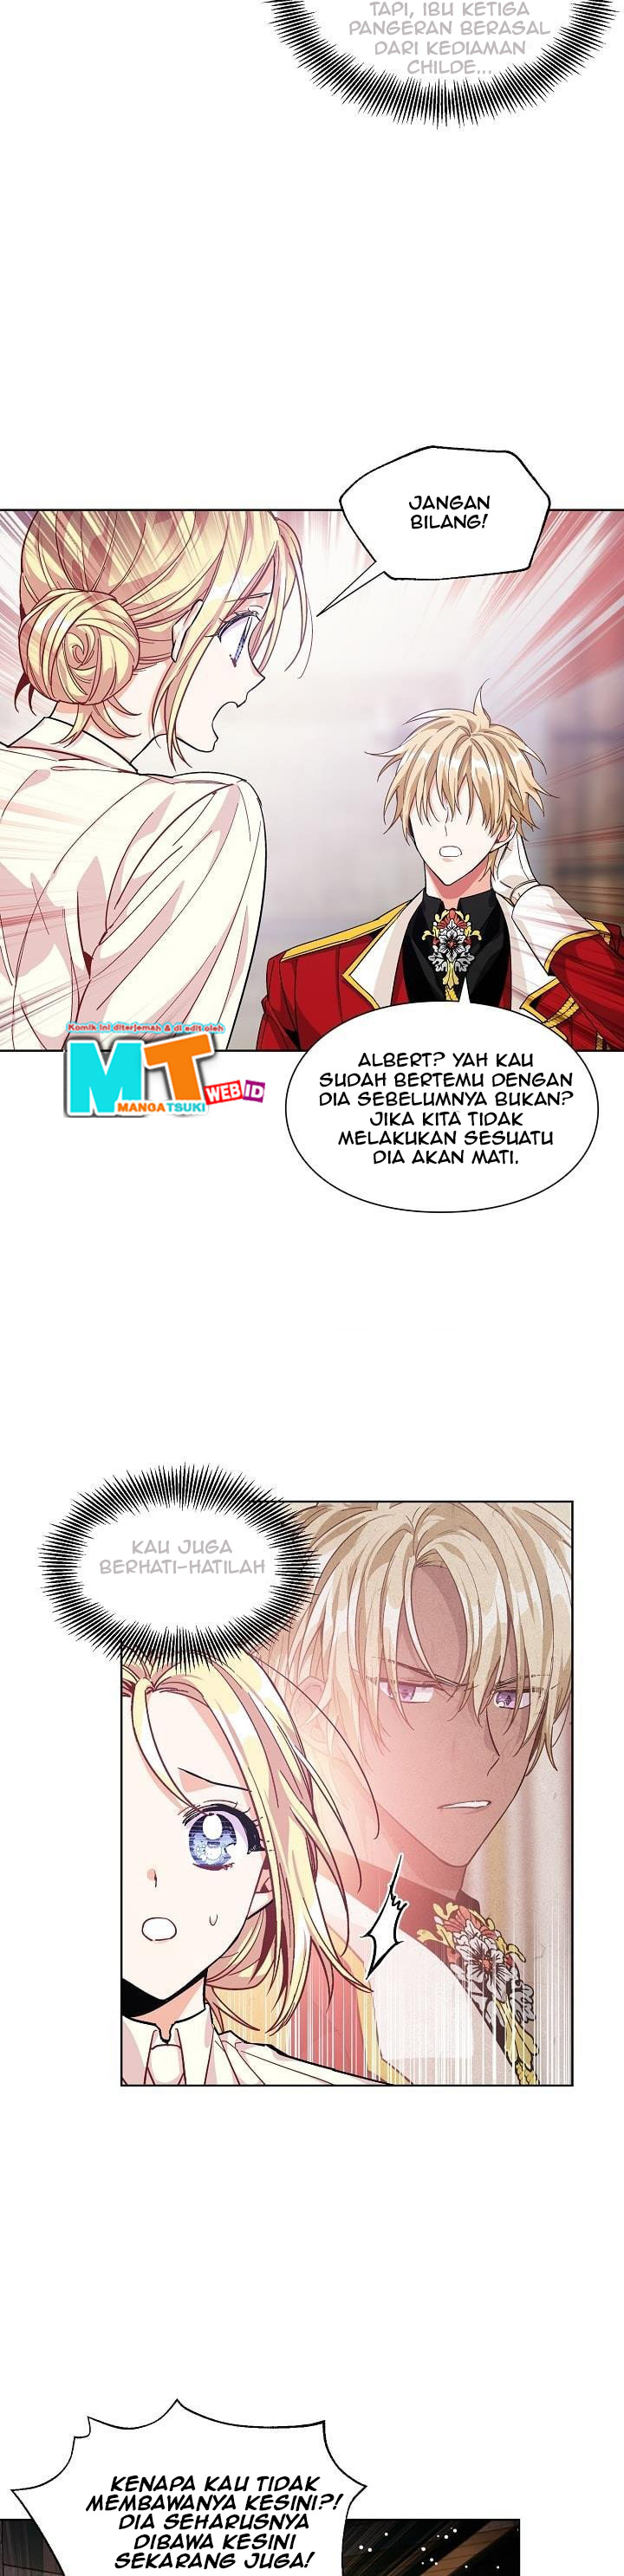 Doctor Elise: The Royal Lady With the Lamp Chapter 62